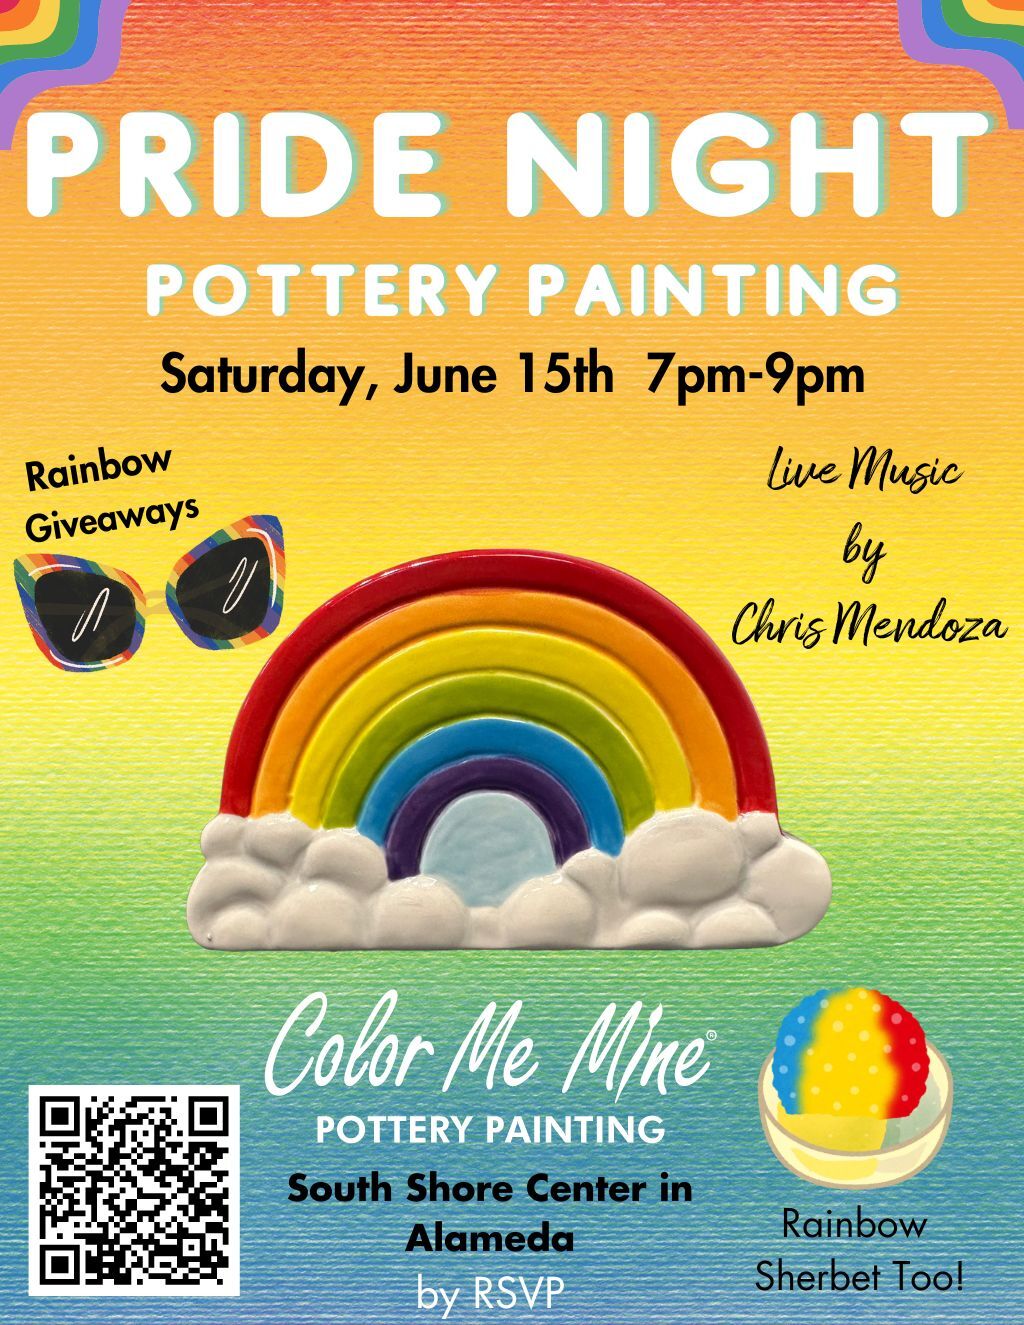 Color Me Mine Celebrate Pride Night with Pottery and Paint at Color Me Mine  promotion flier on Digifli com